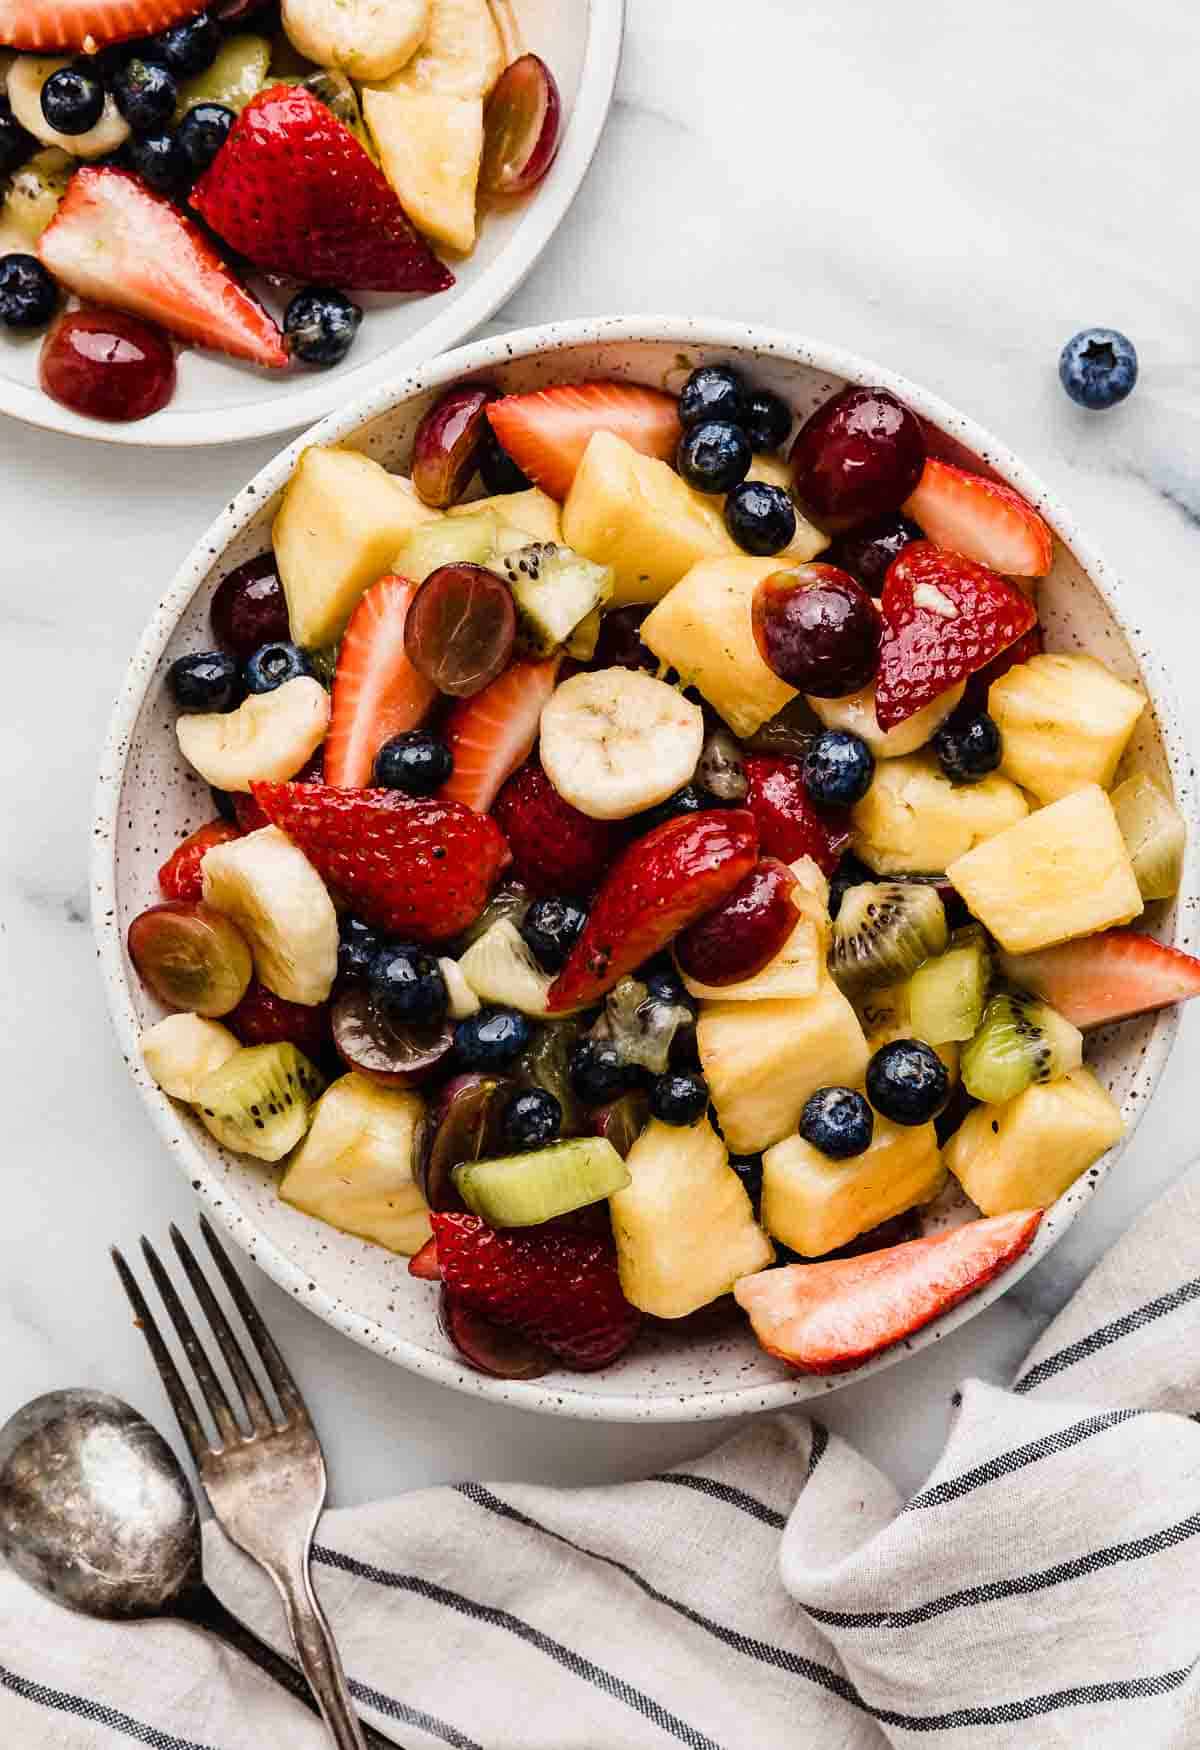 Fruit Salad cocktail with bananas, strawberries, blueberries, kiwi, pineapple topped with a honey dressing.